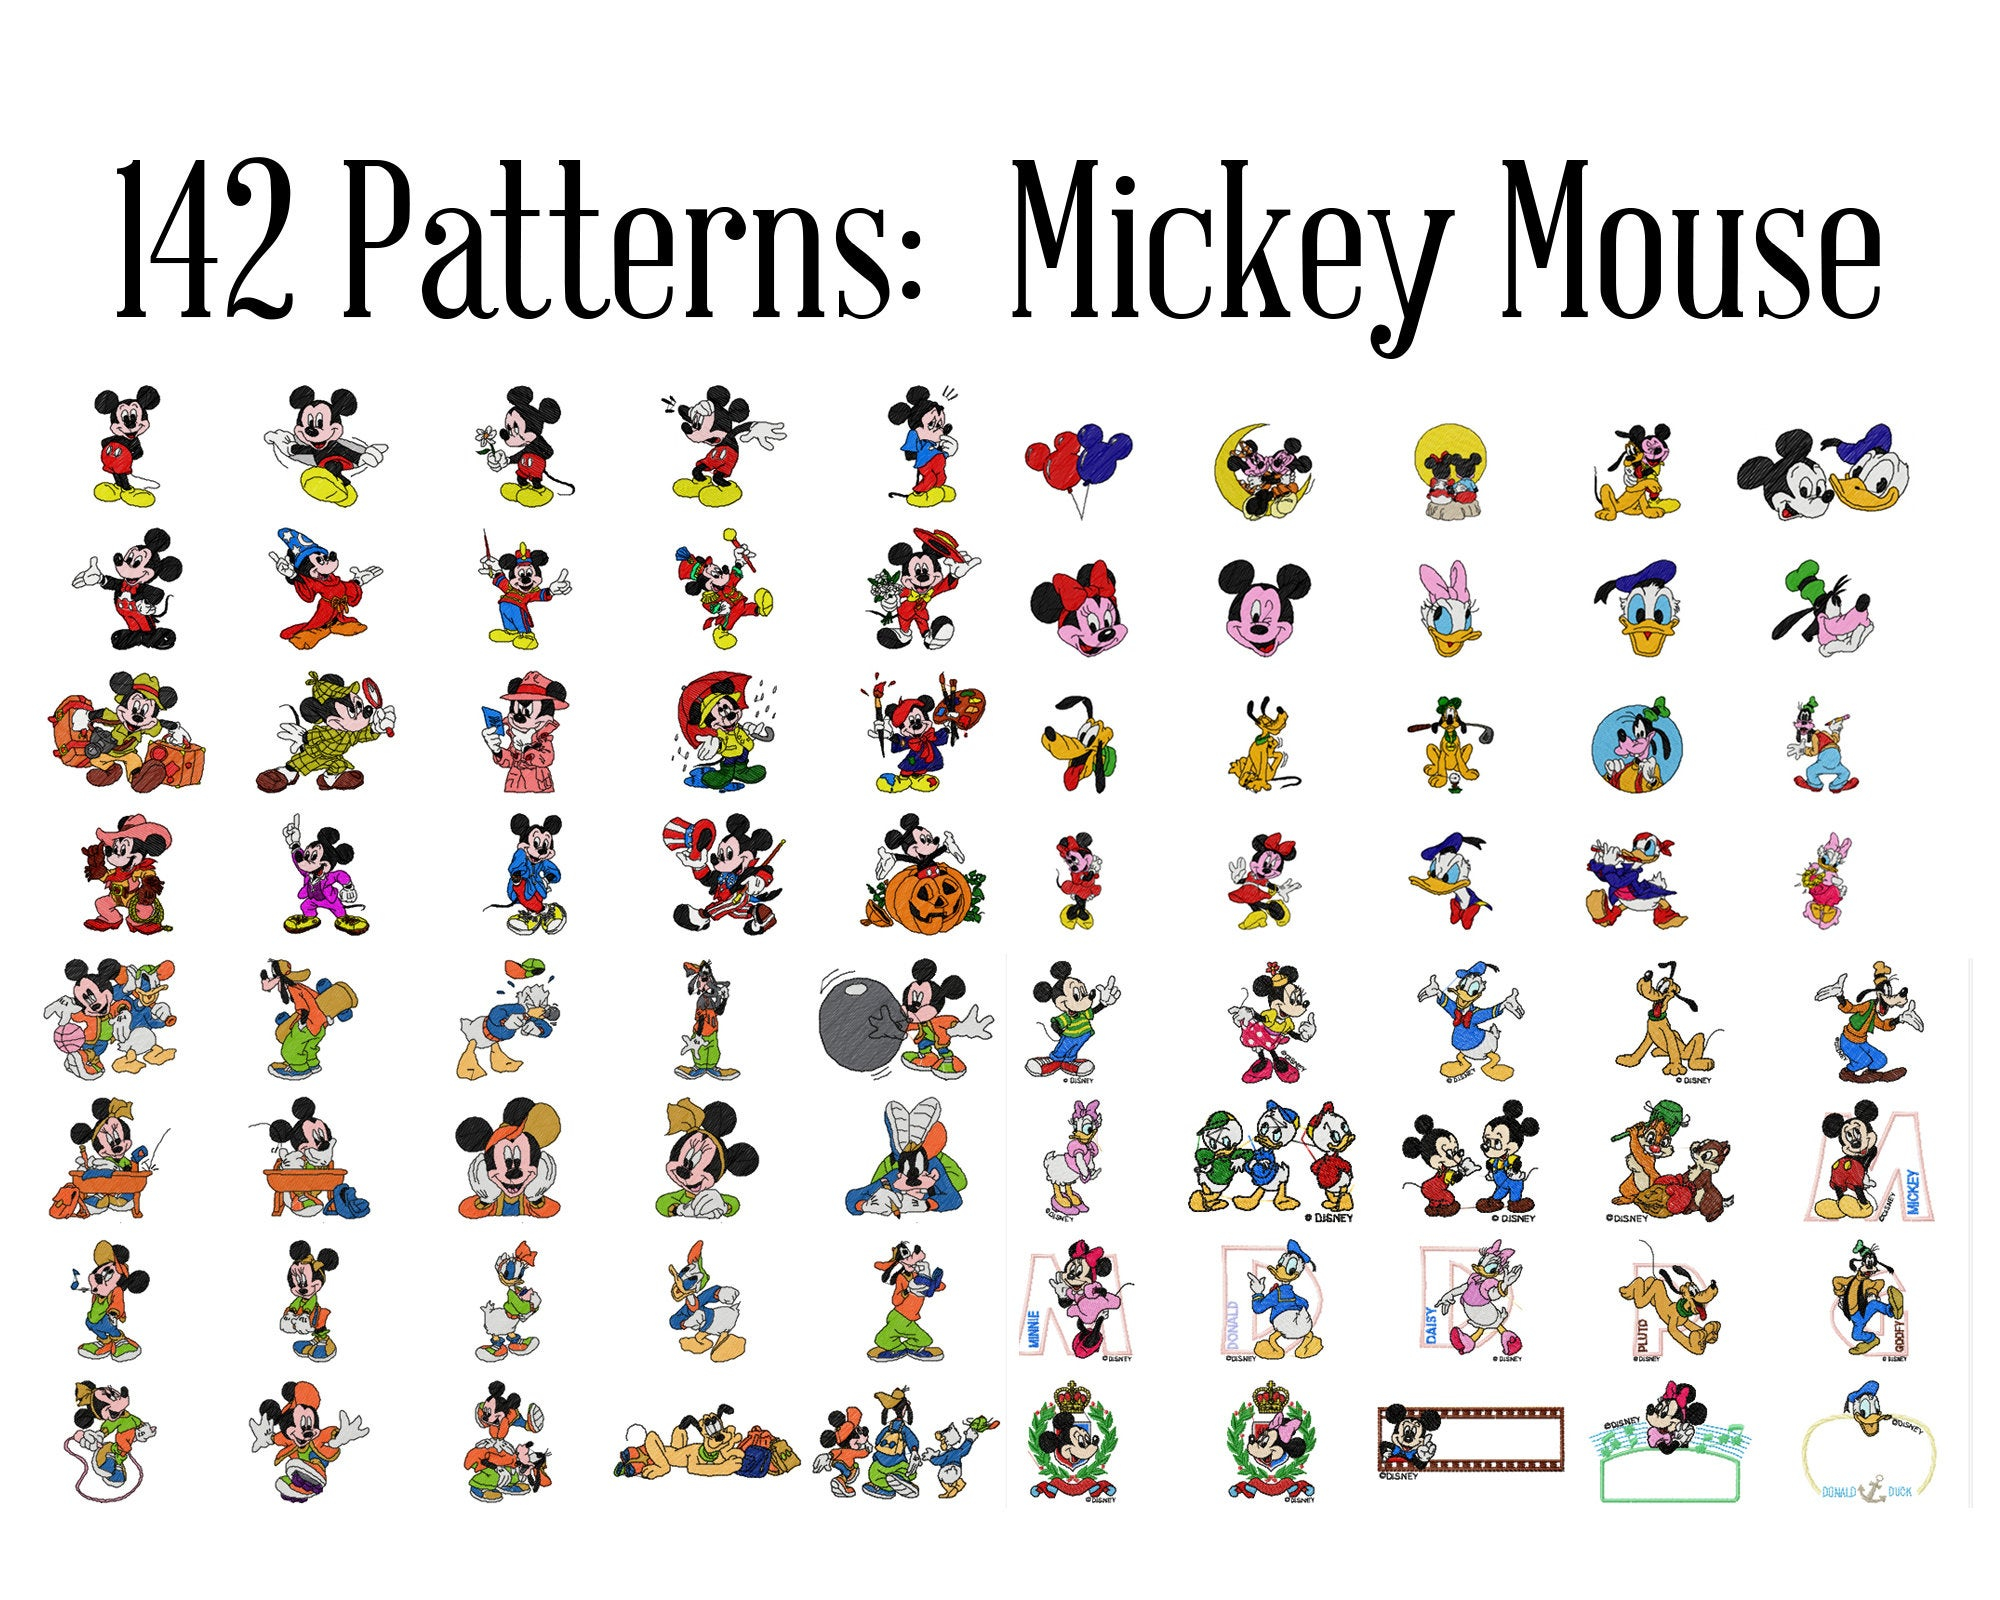 Disney Embroidery Patterns Disney Mickey Mouse Machine Embroidery Patterns Disney Embroidery Disney Designs Mickey Pattern Minnie Mouse Patch Instant Download